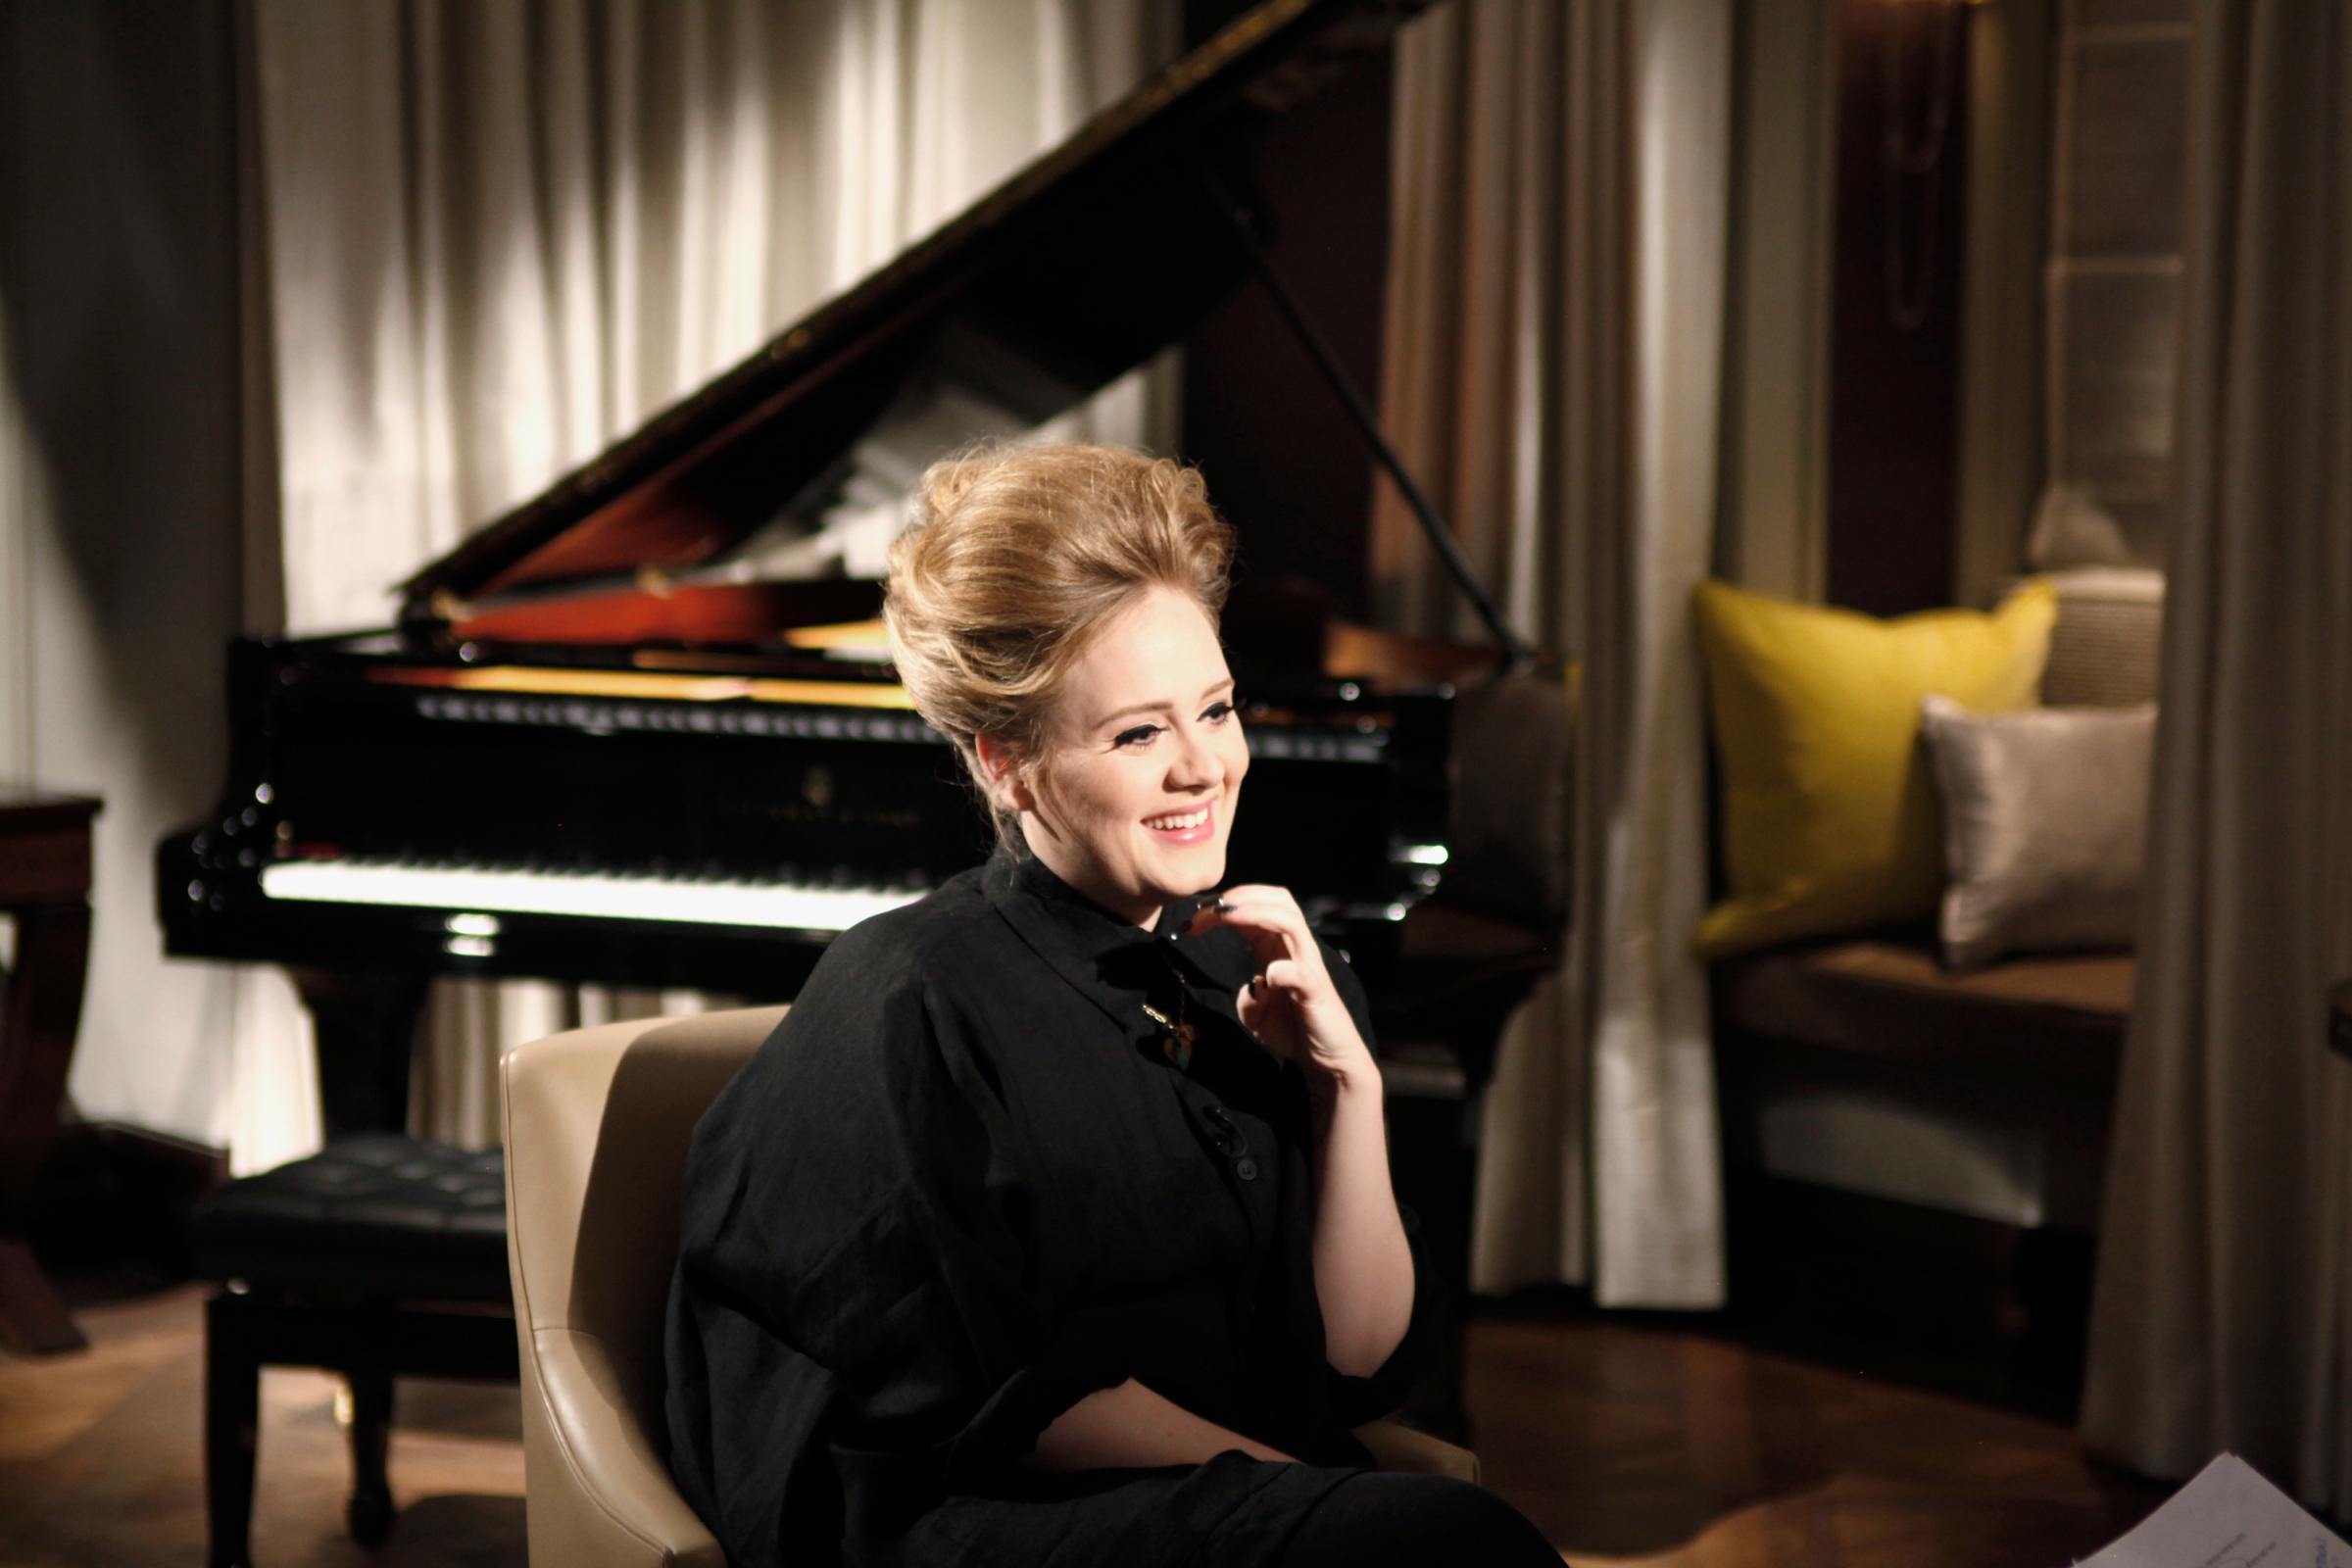 June 2012 ADELE LIVE IN LONDON -- Pictured: (l-r) Adele sits down with Matt Lauer to discuss her upcoming TV special Adele Live in London with Matt Lauer to air on NBC Sunday, June 3rd from 8-9 pm -- (Photo by: NBC/NBCU Photo Bank via Getty Images)